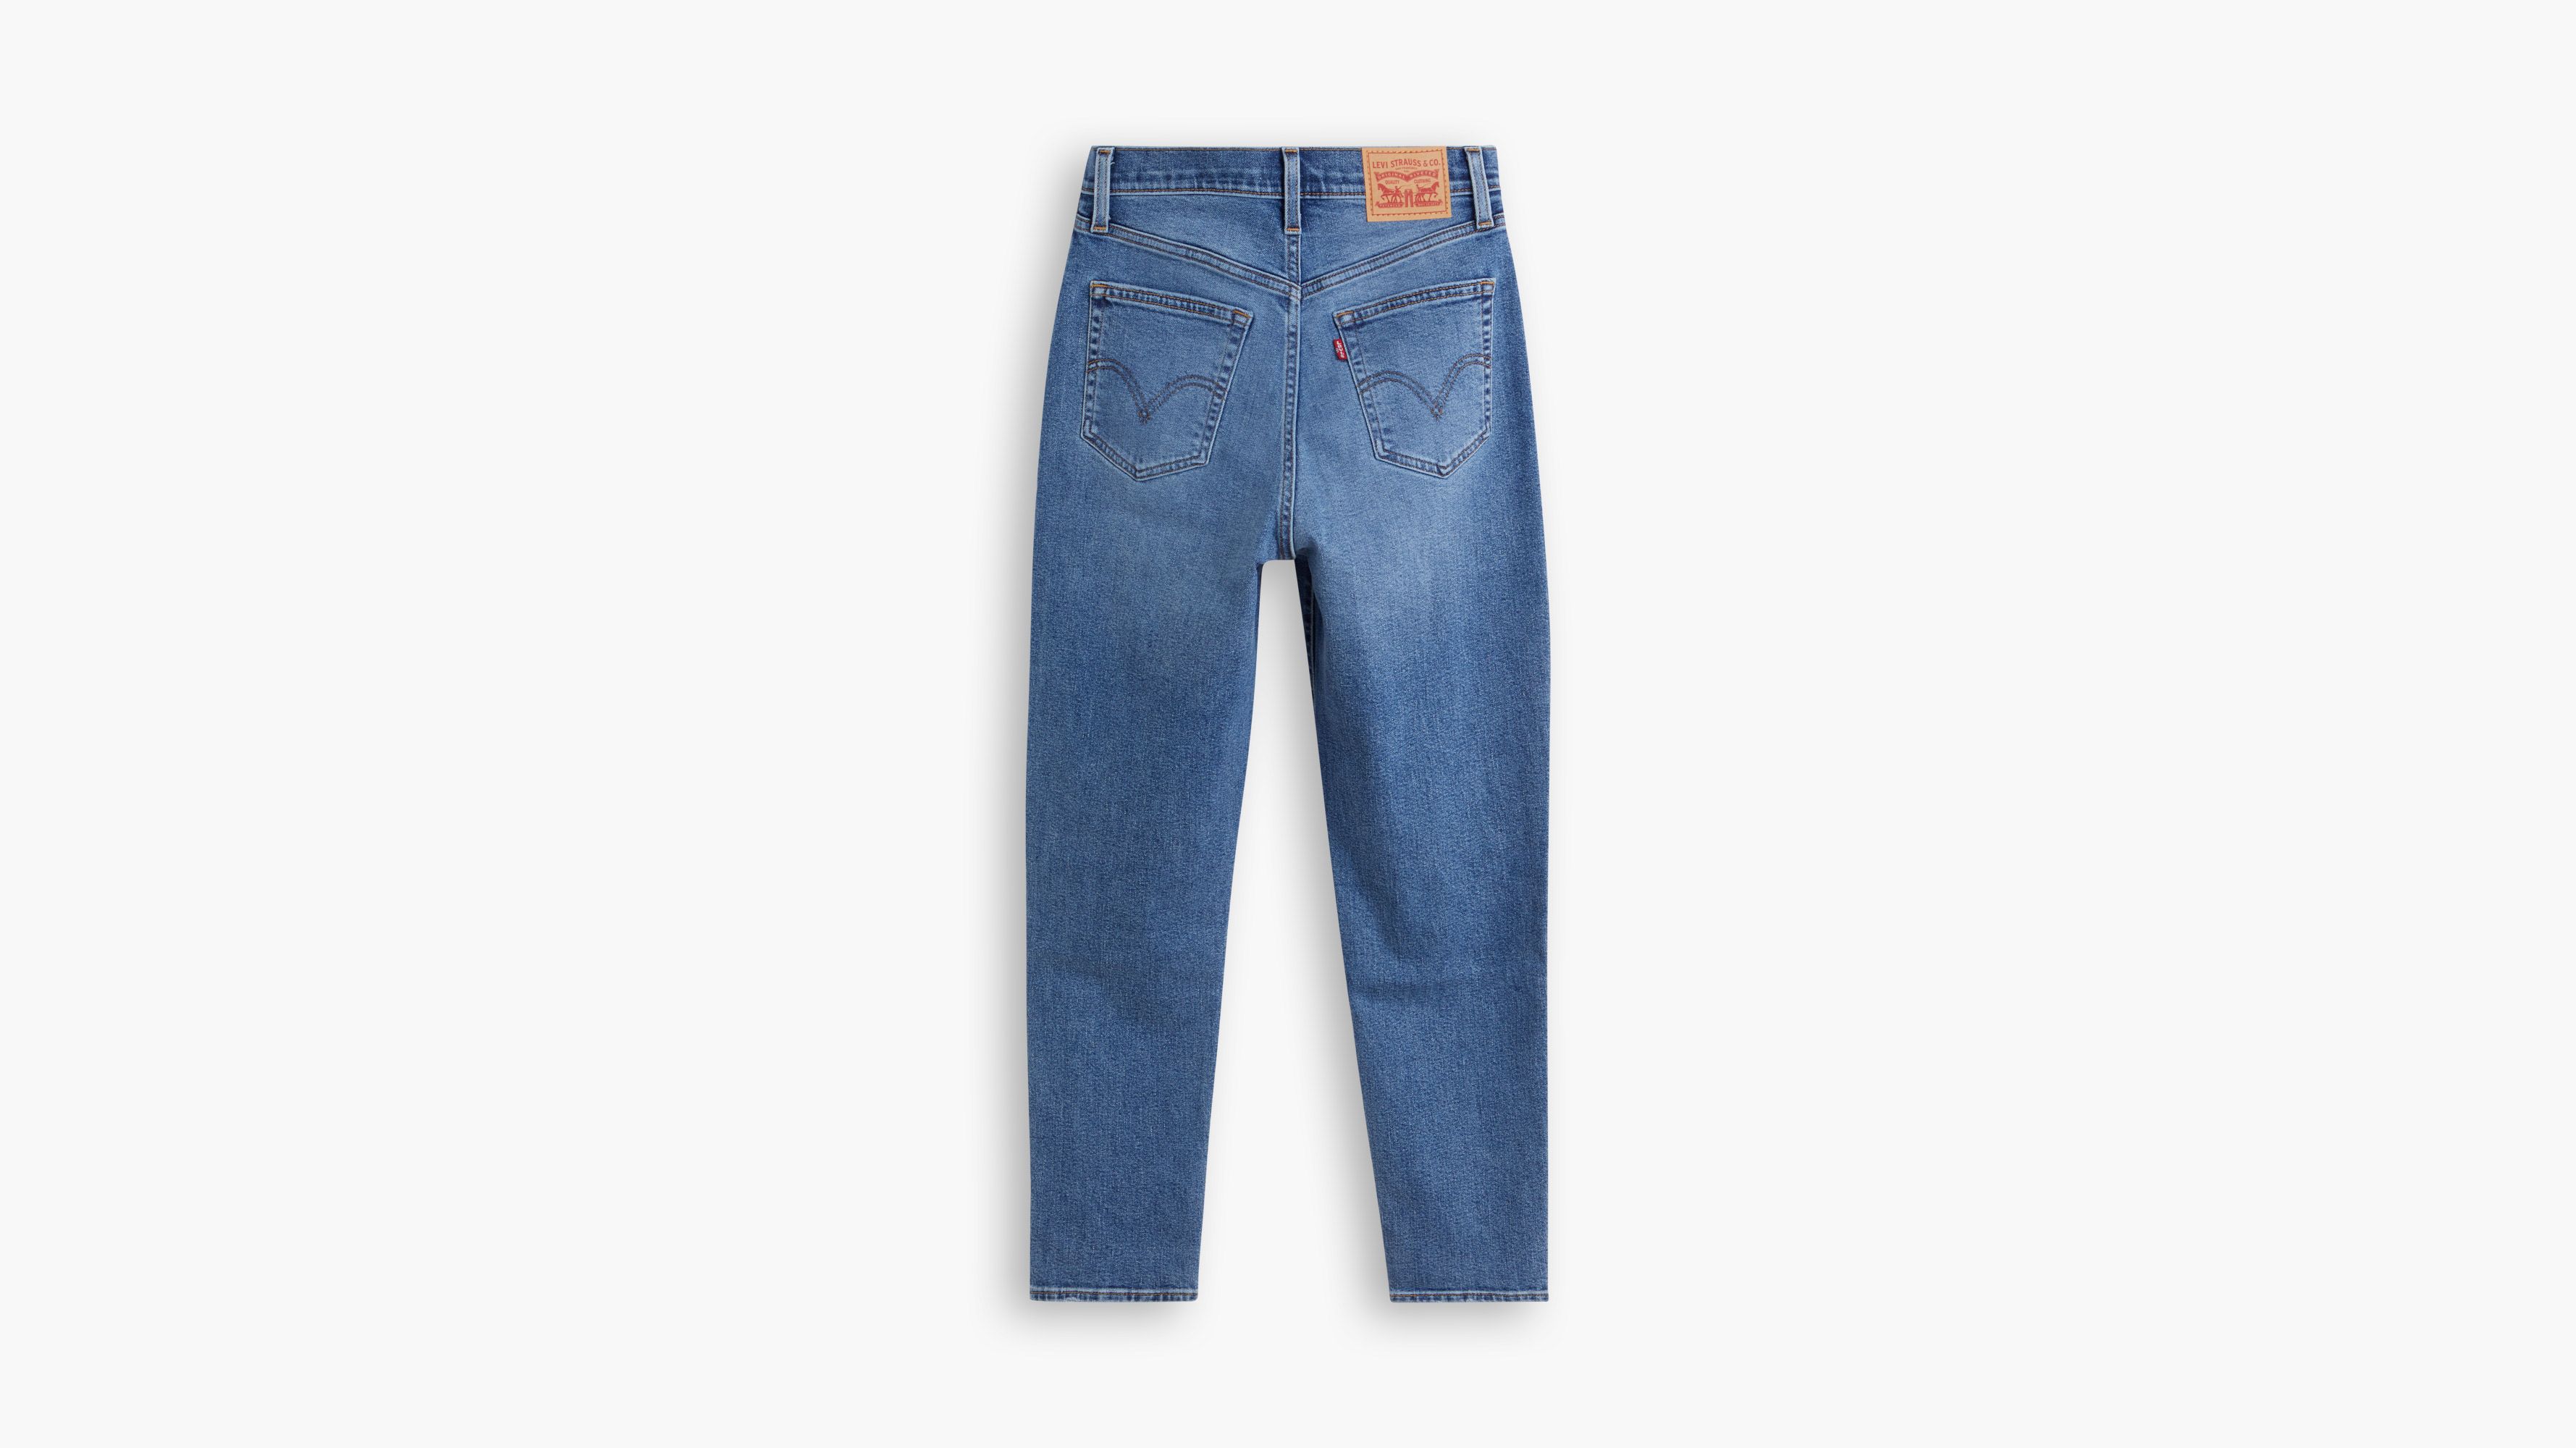 Closed Hoge taille jeans blauw casual uitstraling Mode Spijkerbroeken Hoge taille jeans 